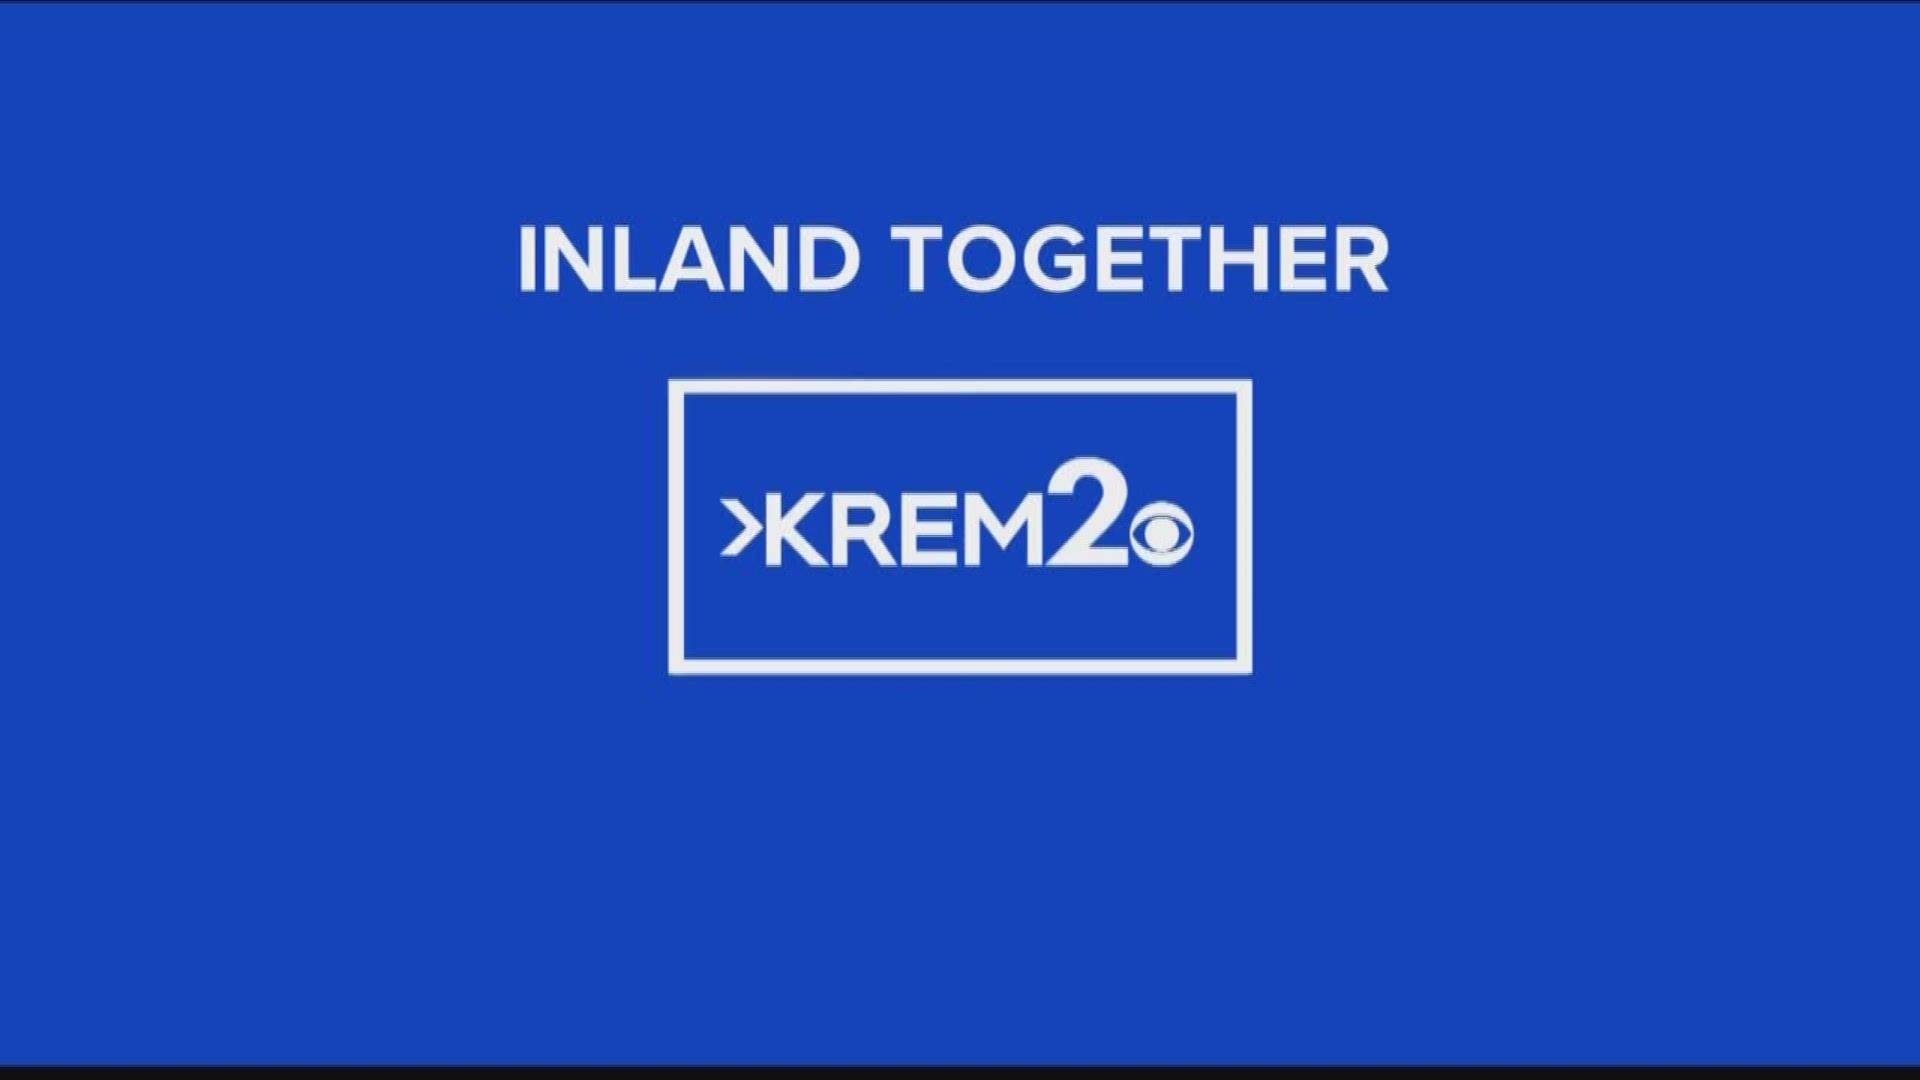 Part 2 of the KREM 2 News Inland Together Special on May 21, 2020.